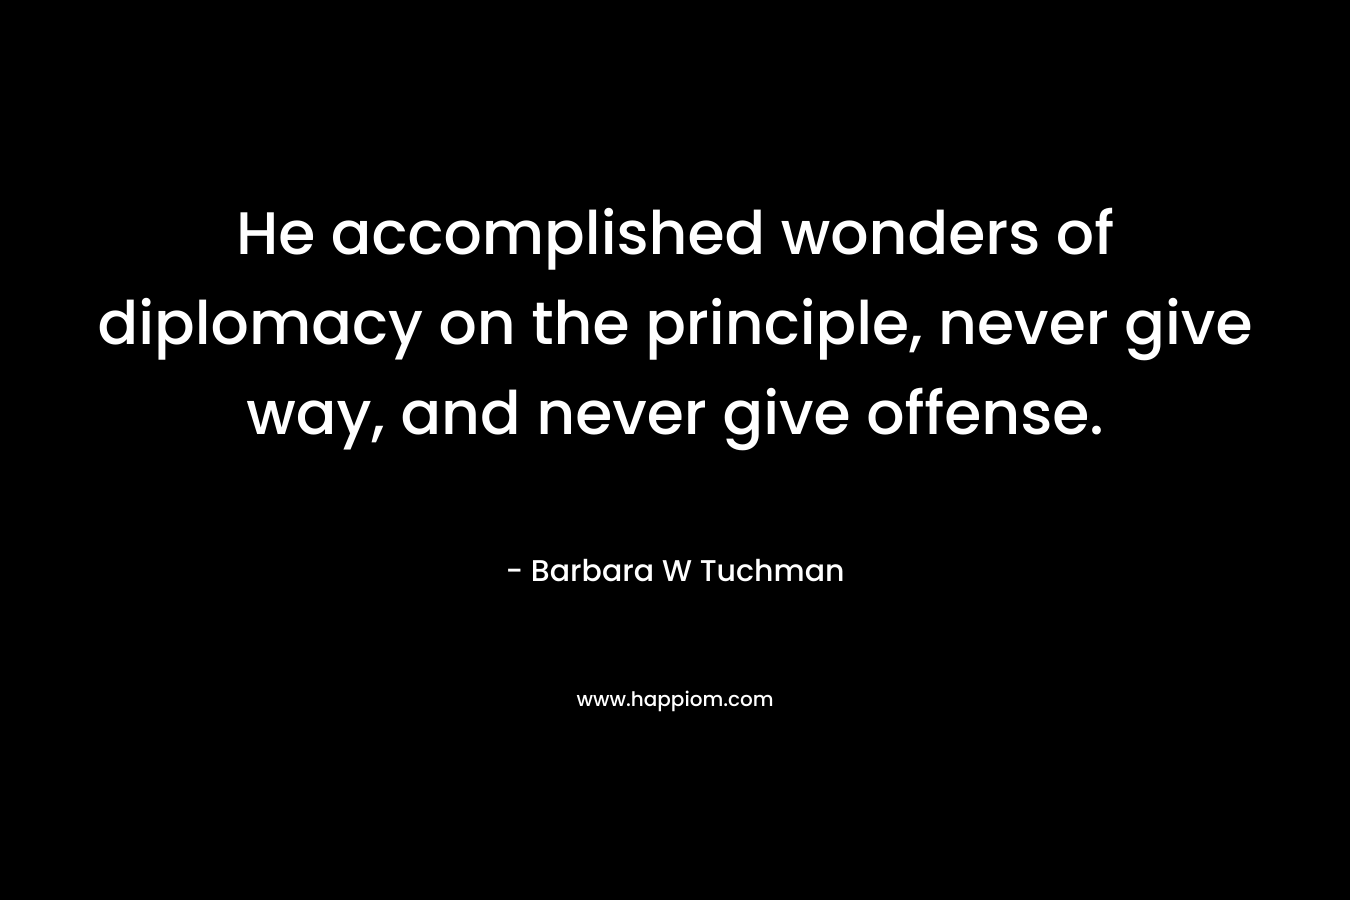 He accomplished wonders of diplomacy on the principle, never give way, and never give offense. – Barbara W Tuchman